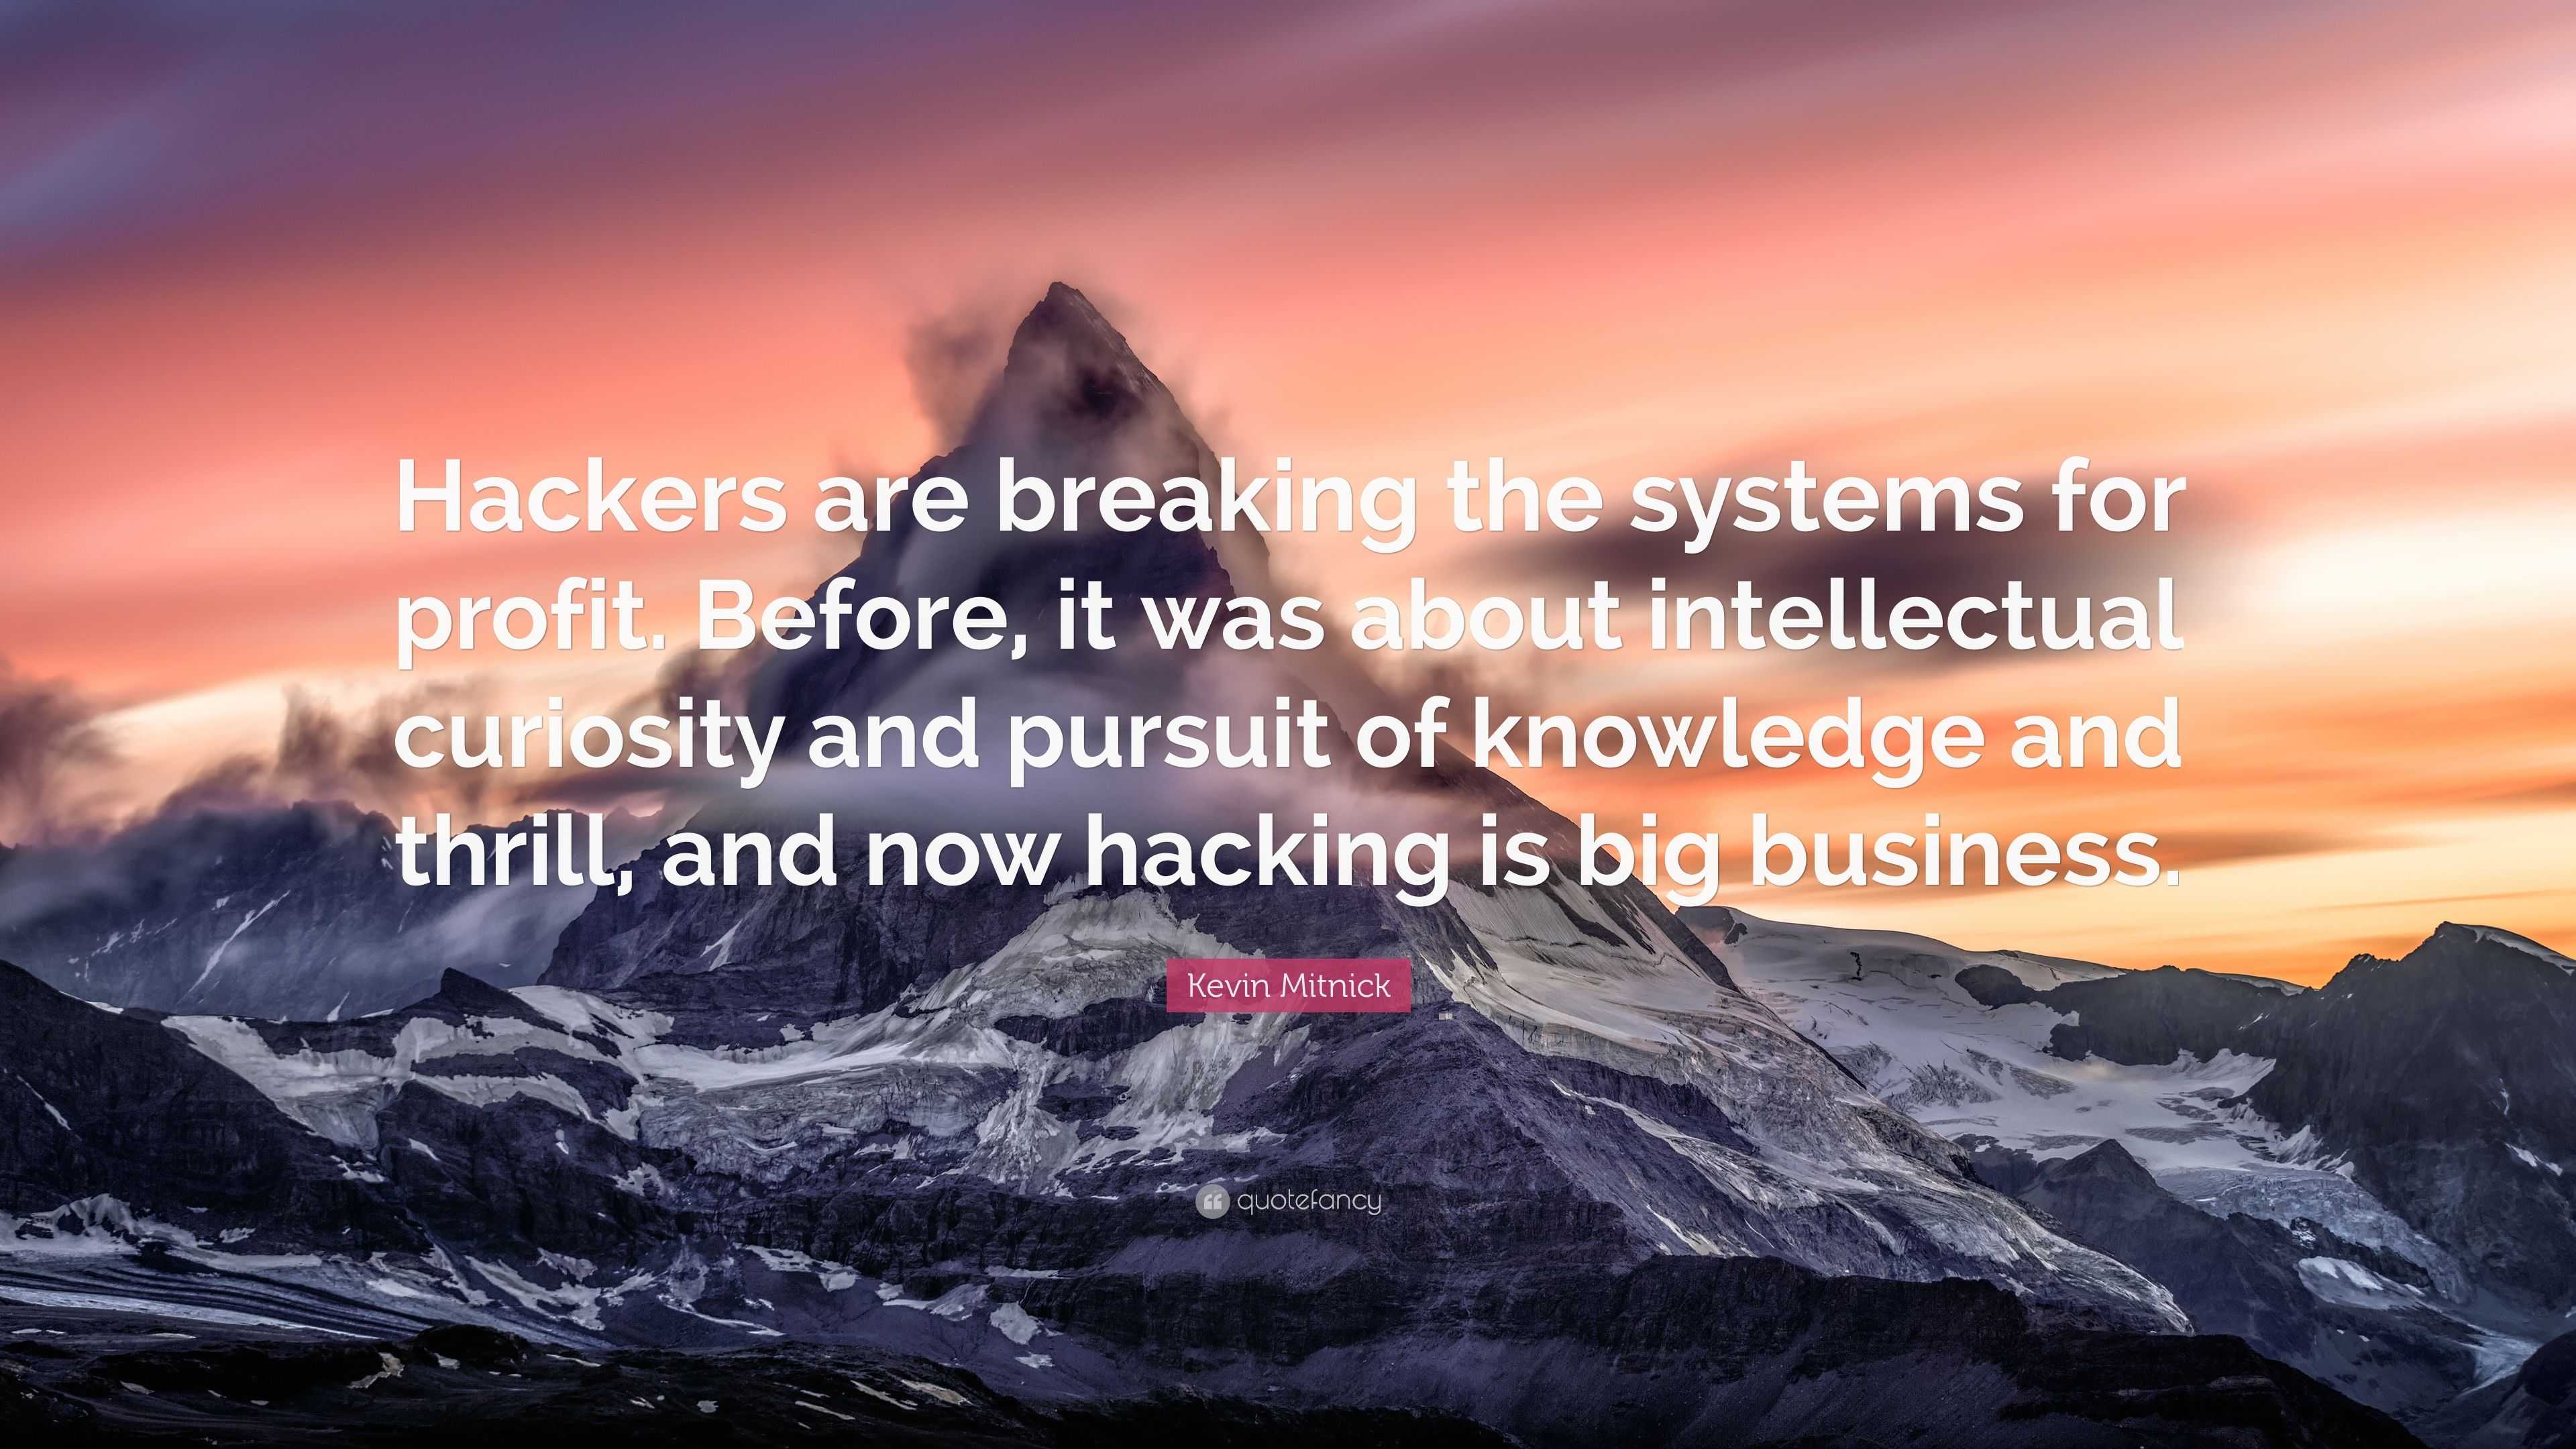 Kevin Mitnick Quote “Hackers are breaking the systems for profit